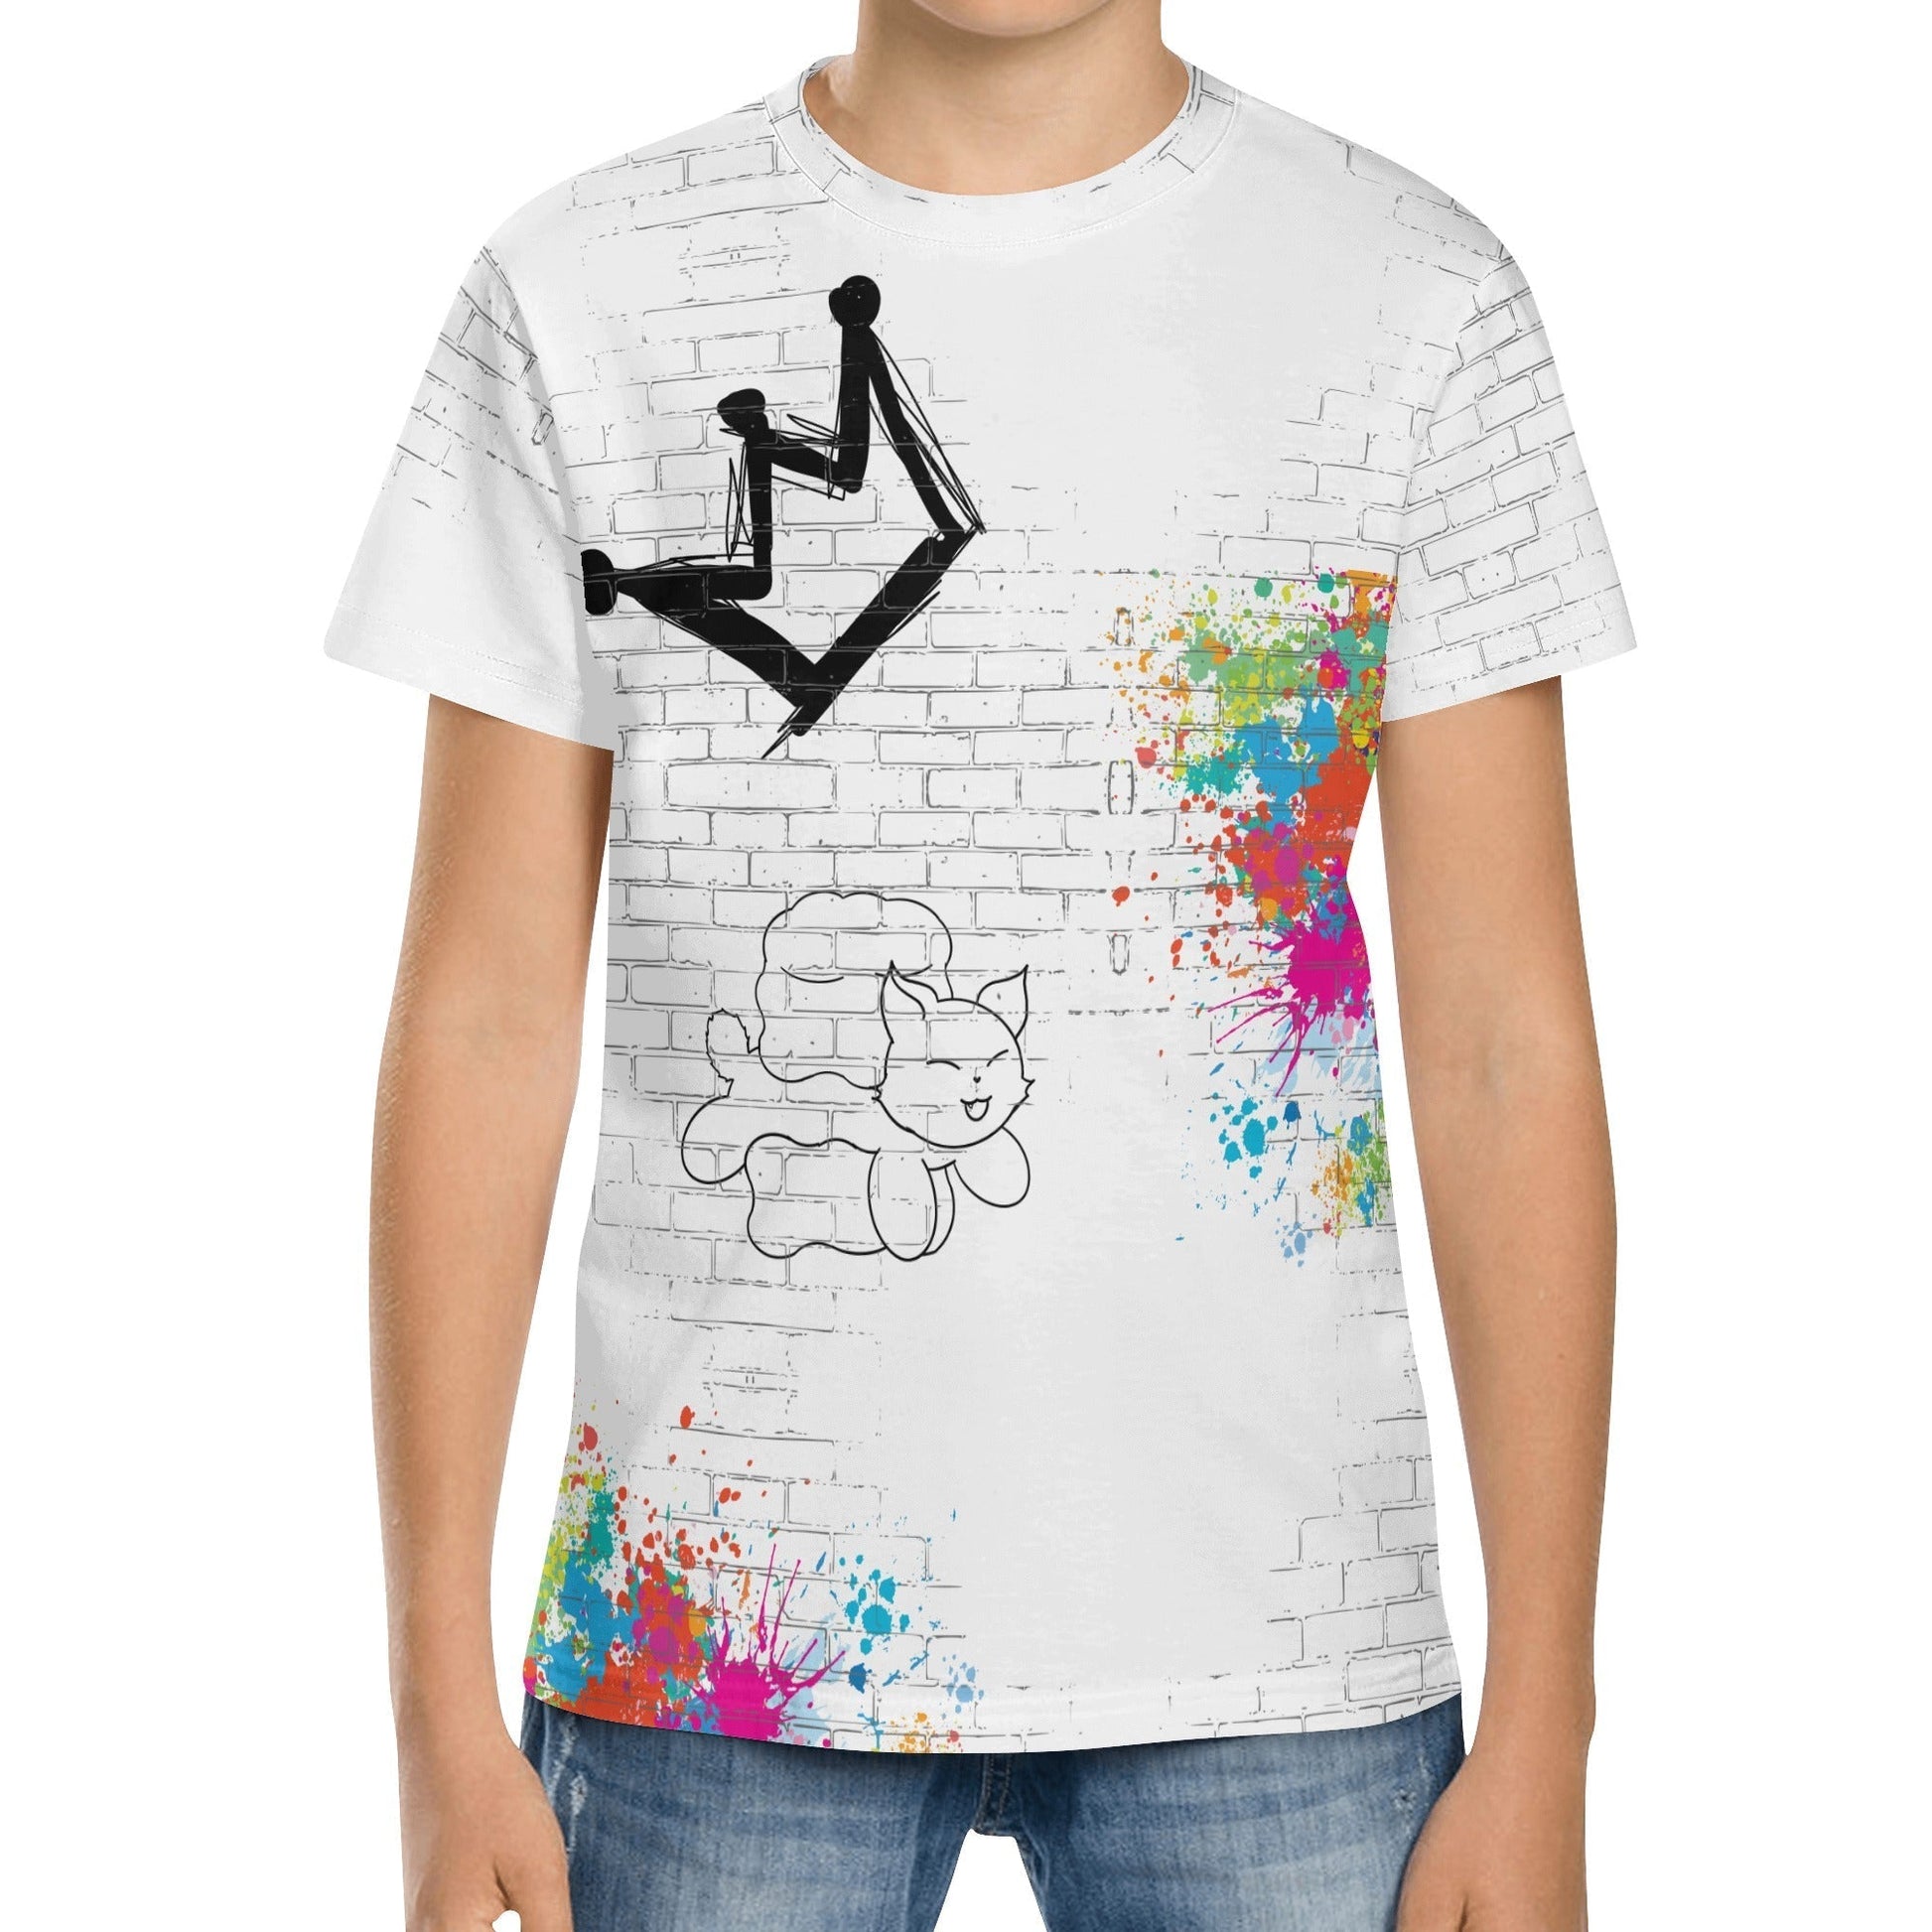 Stand out  with the  Street style Kids Short Sleeve T-Shirt  available at Hey Nugget. Grab yours today!